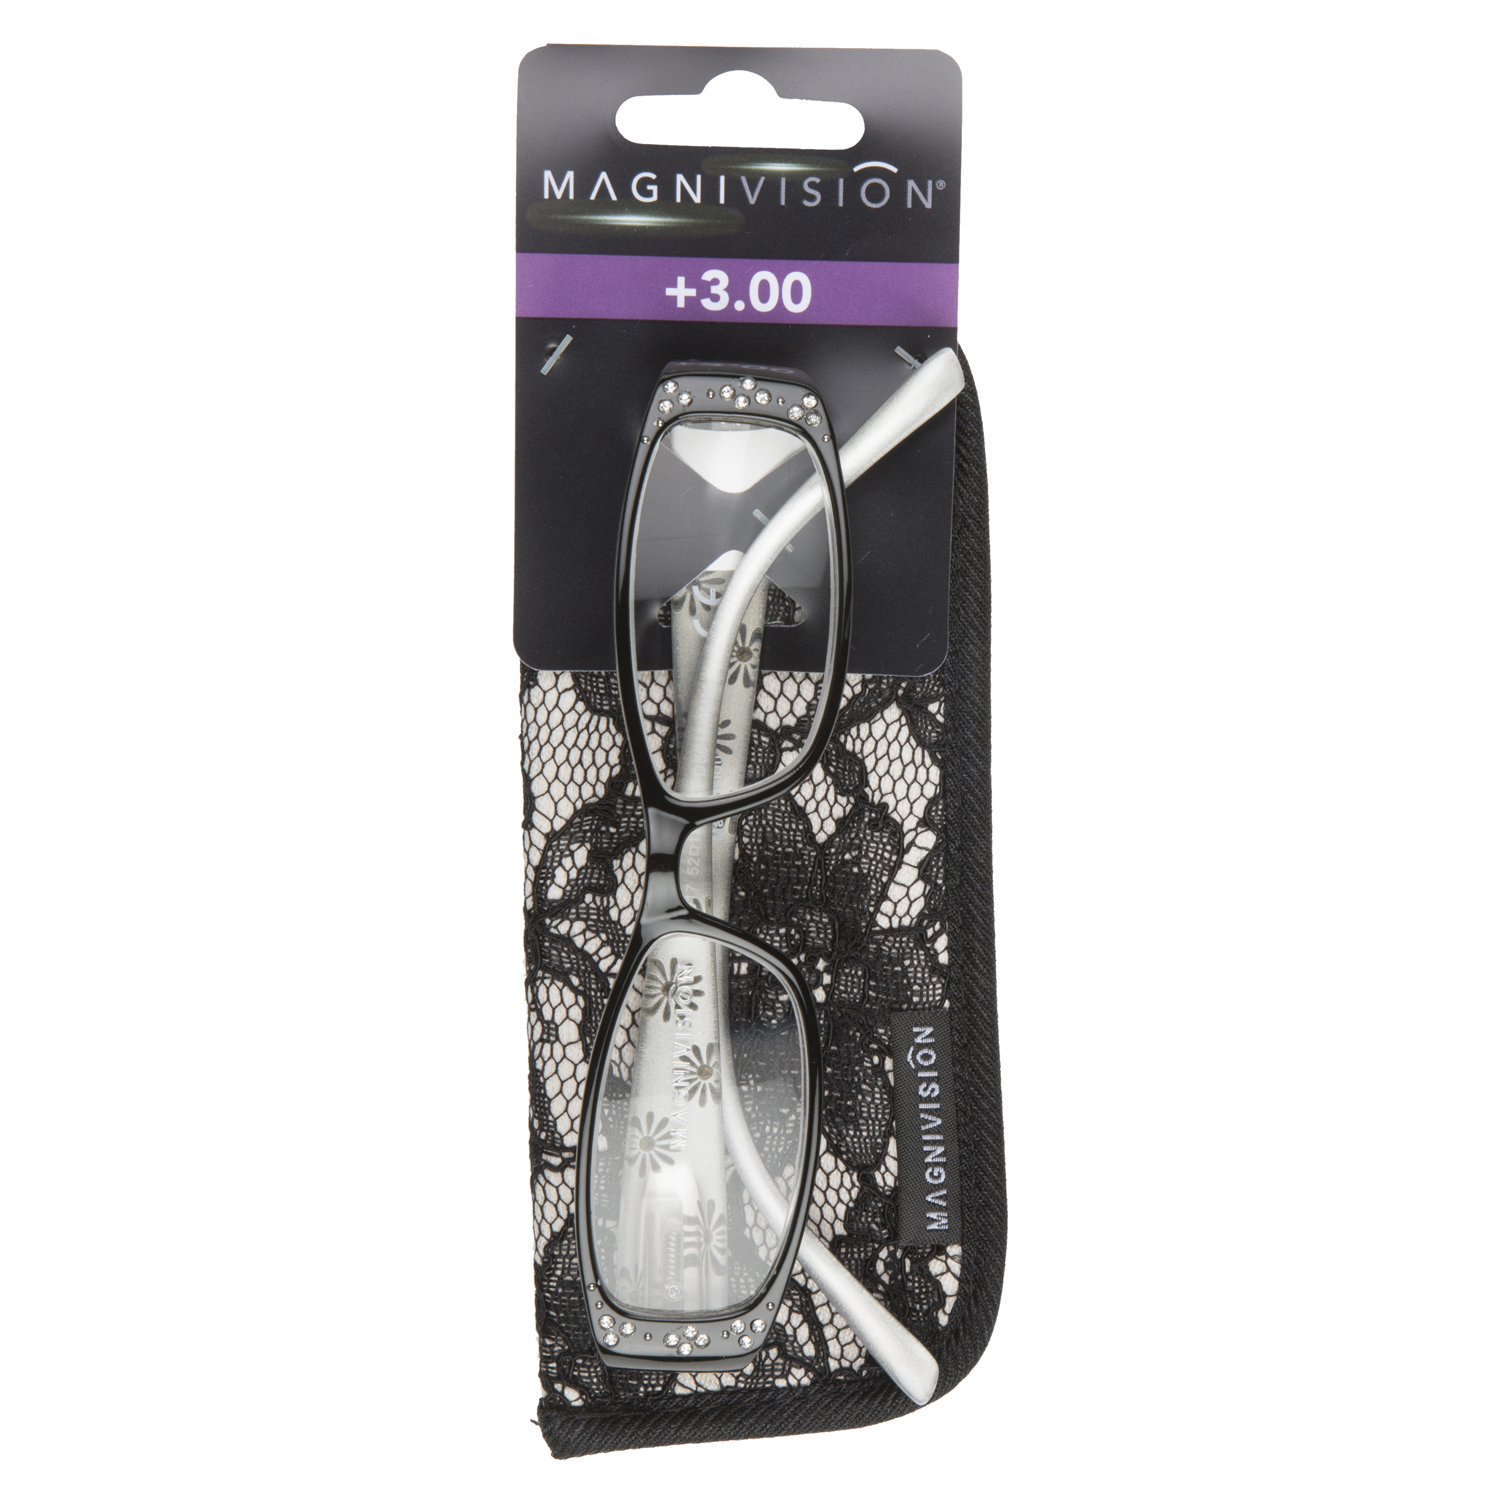 Tilly Magnivision Reading Glasses - 3.00 Image 5